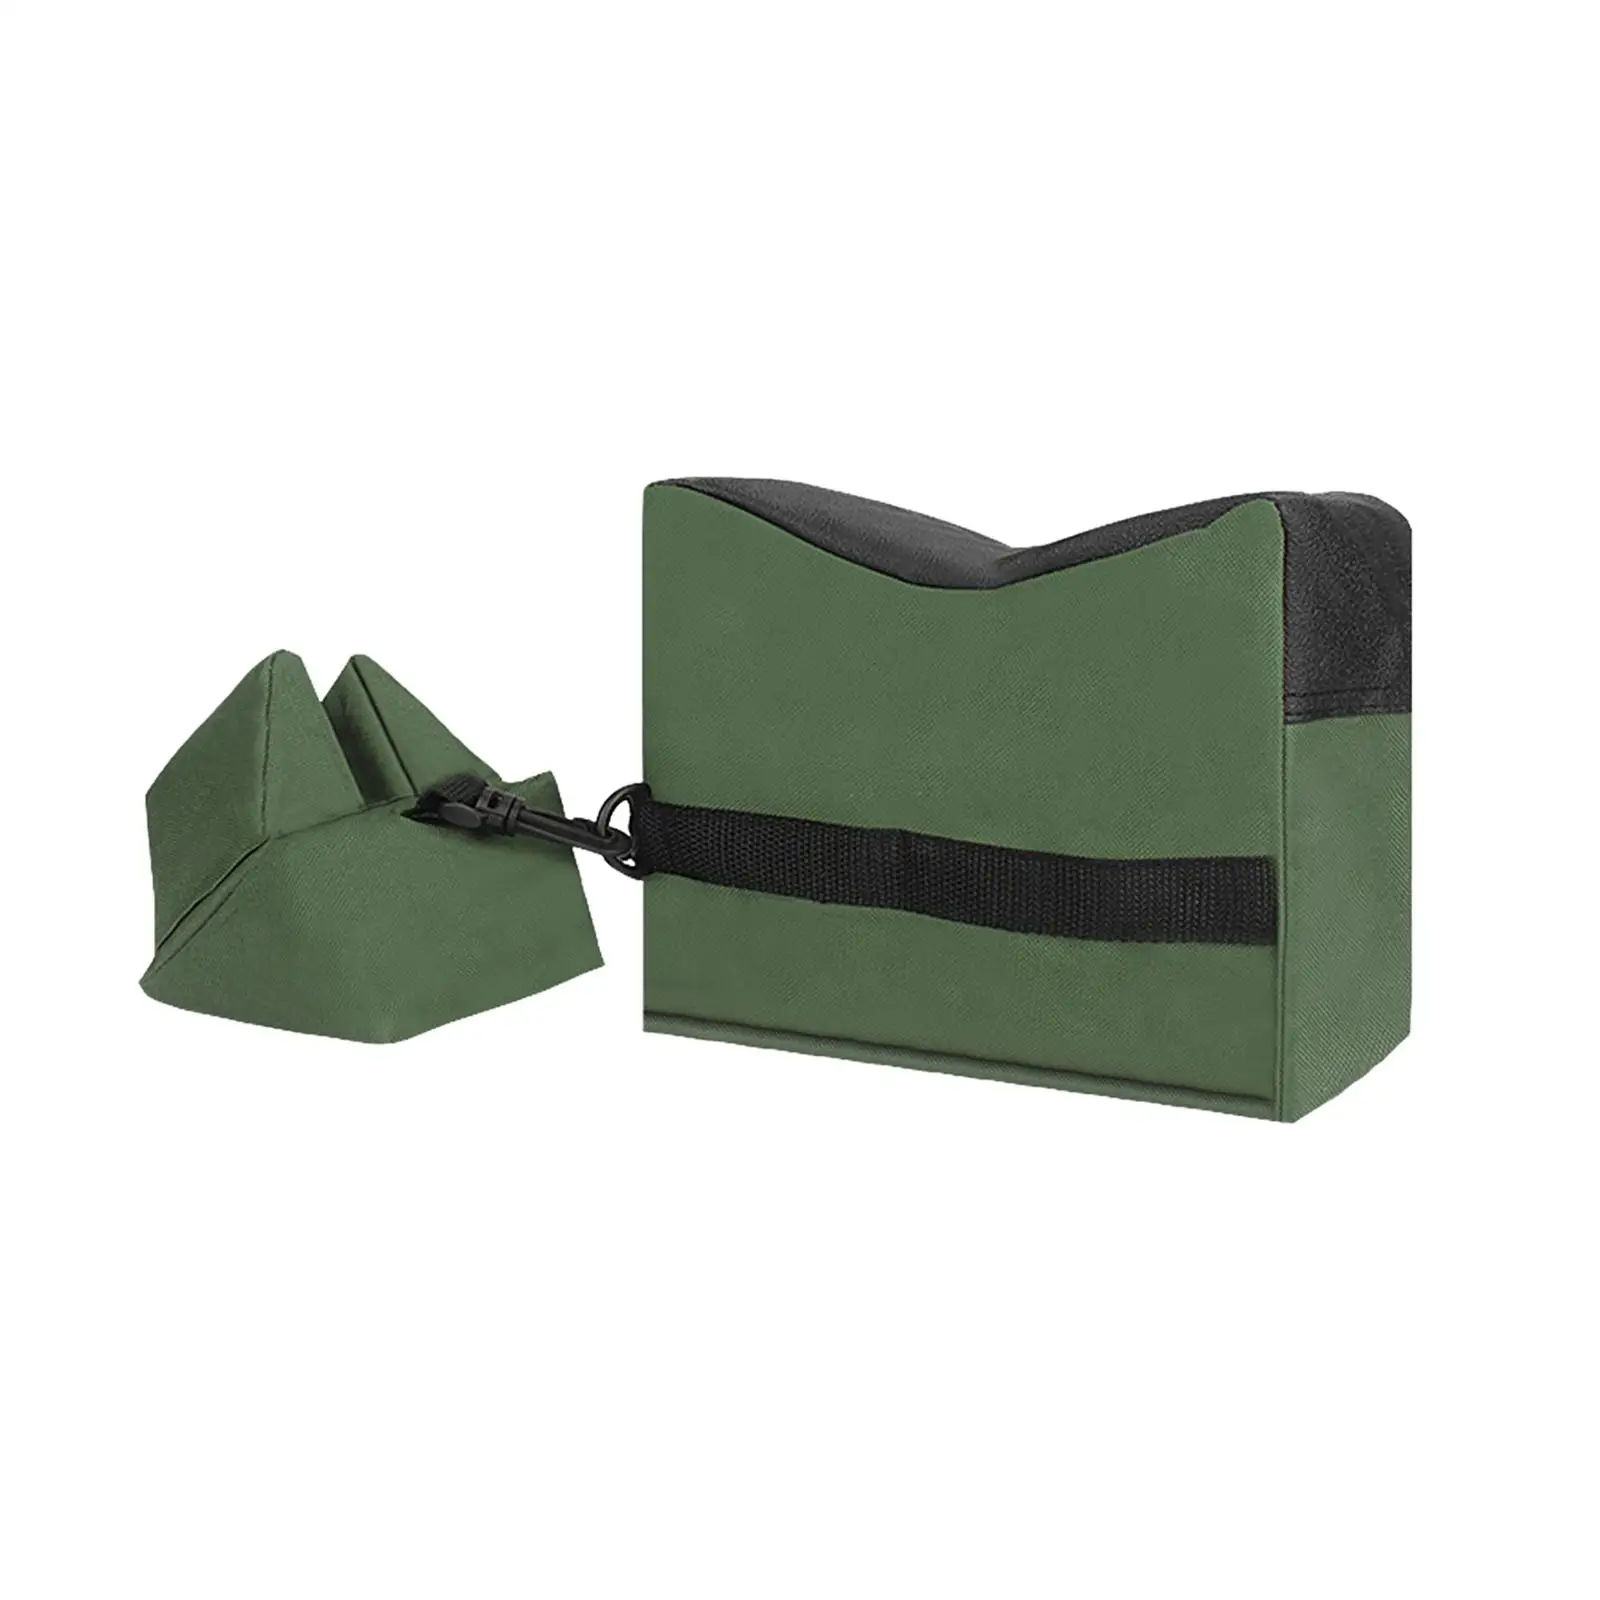 Shooting Range Sand Bag Target Front & Rear Rest Hunting Accessories